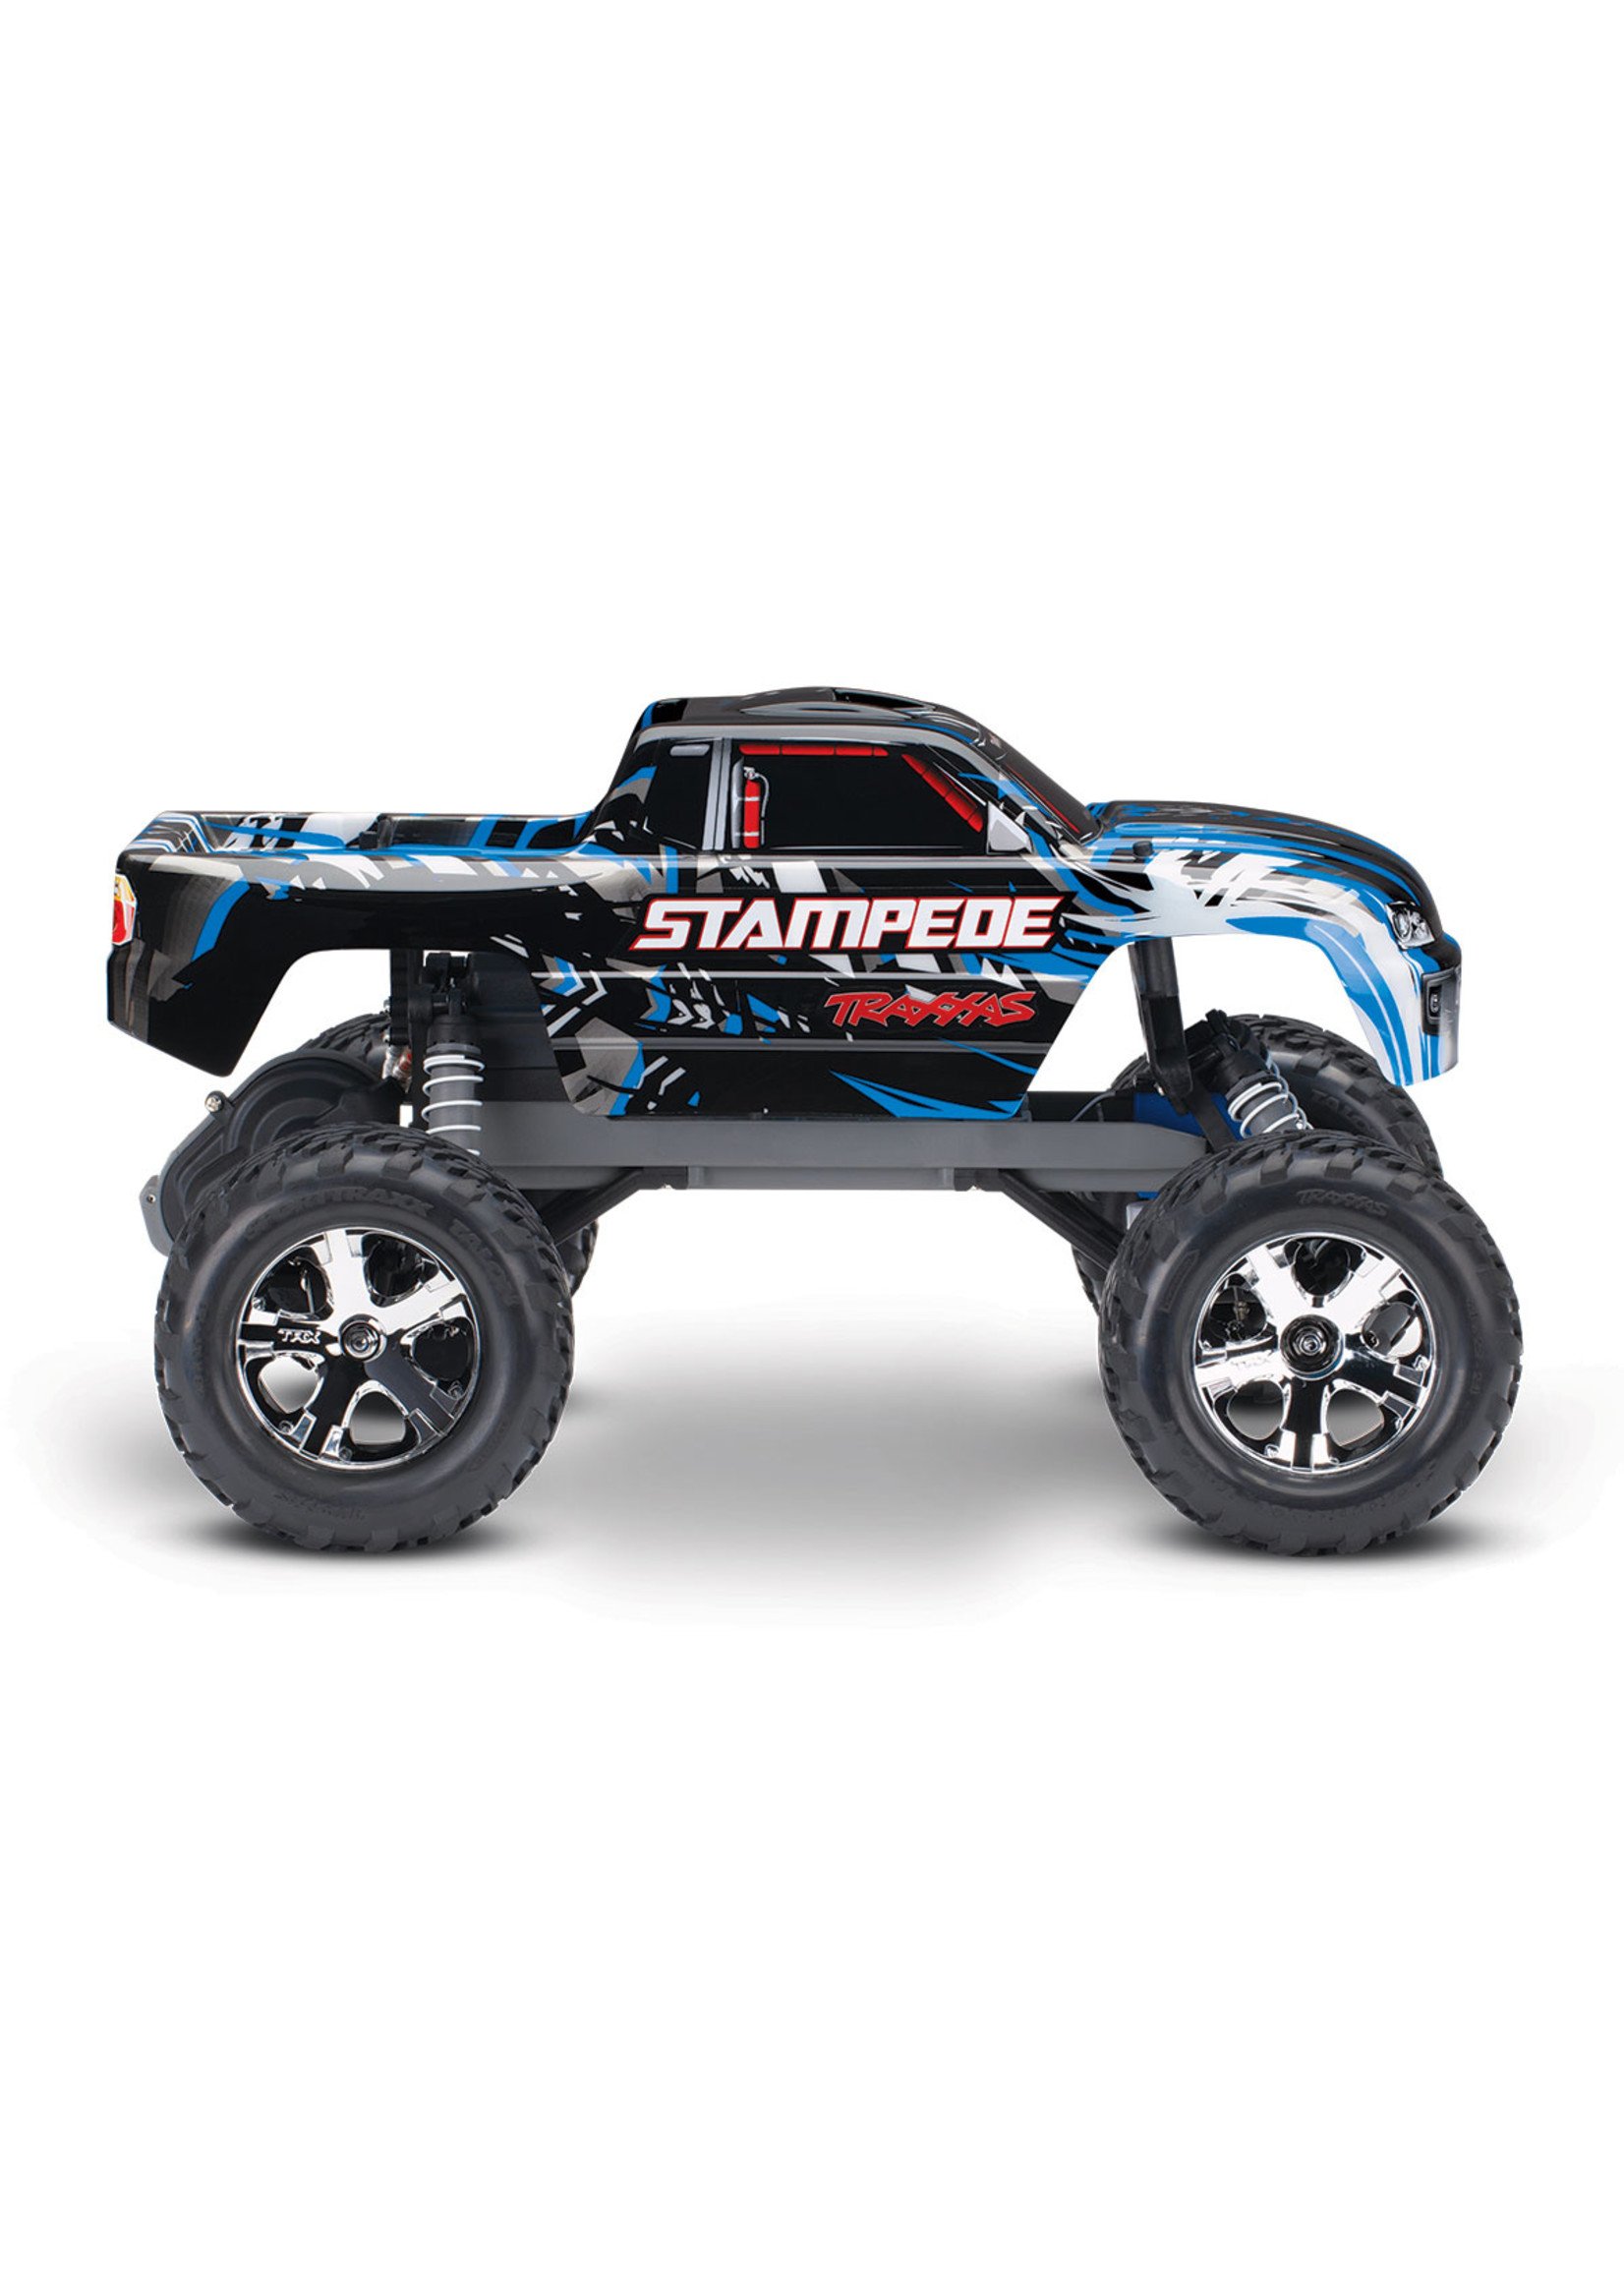 Traxxas 1/10 Stampede XL-5 2WD RTR Monster Truck - Blue